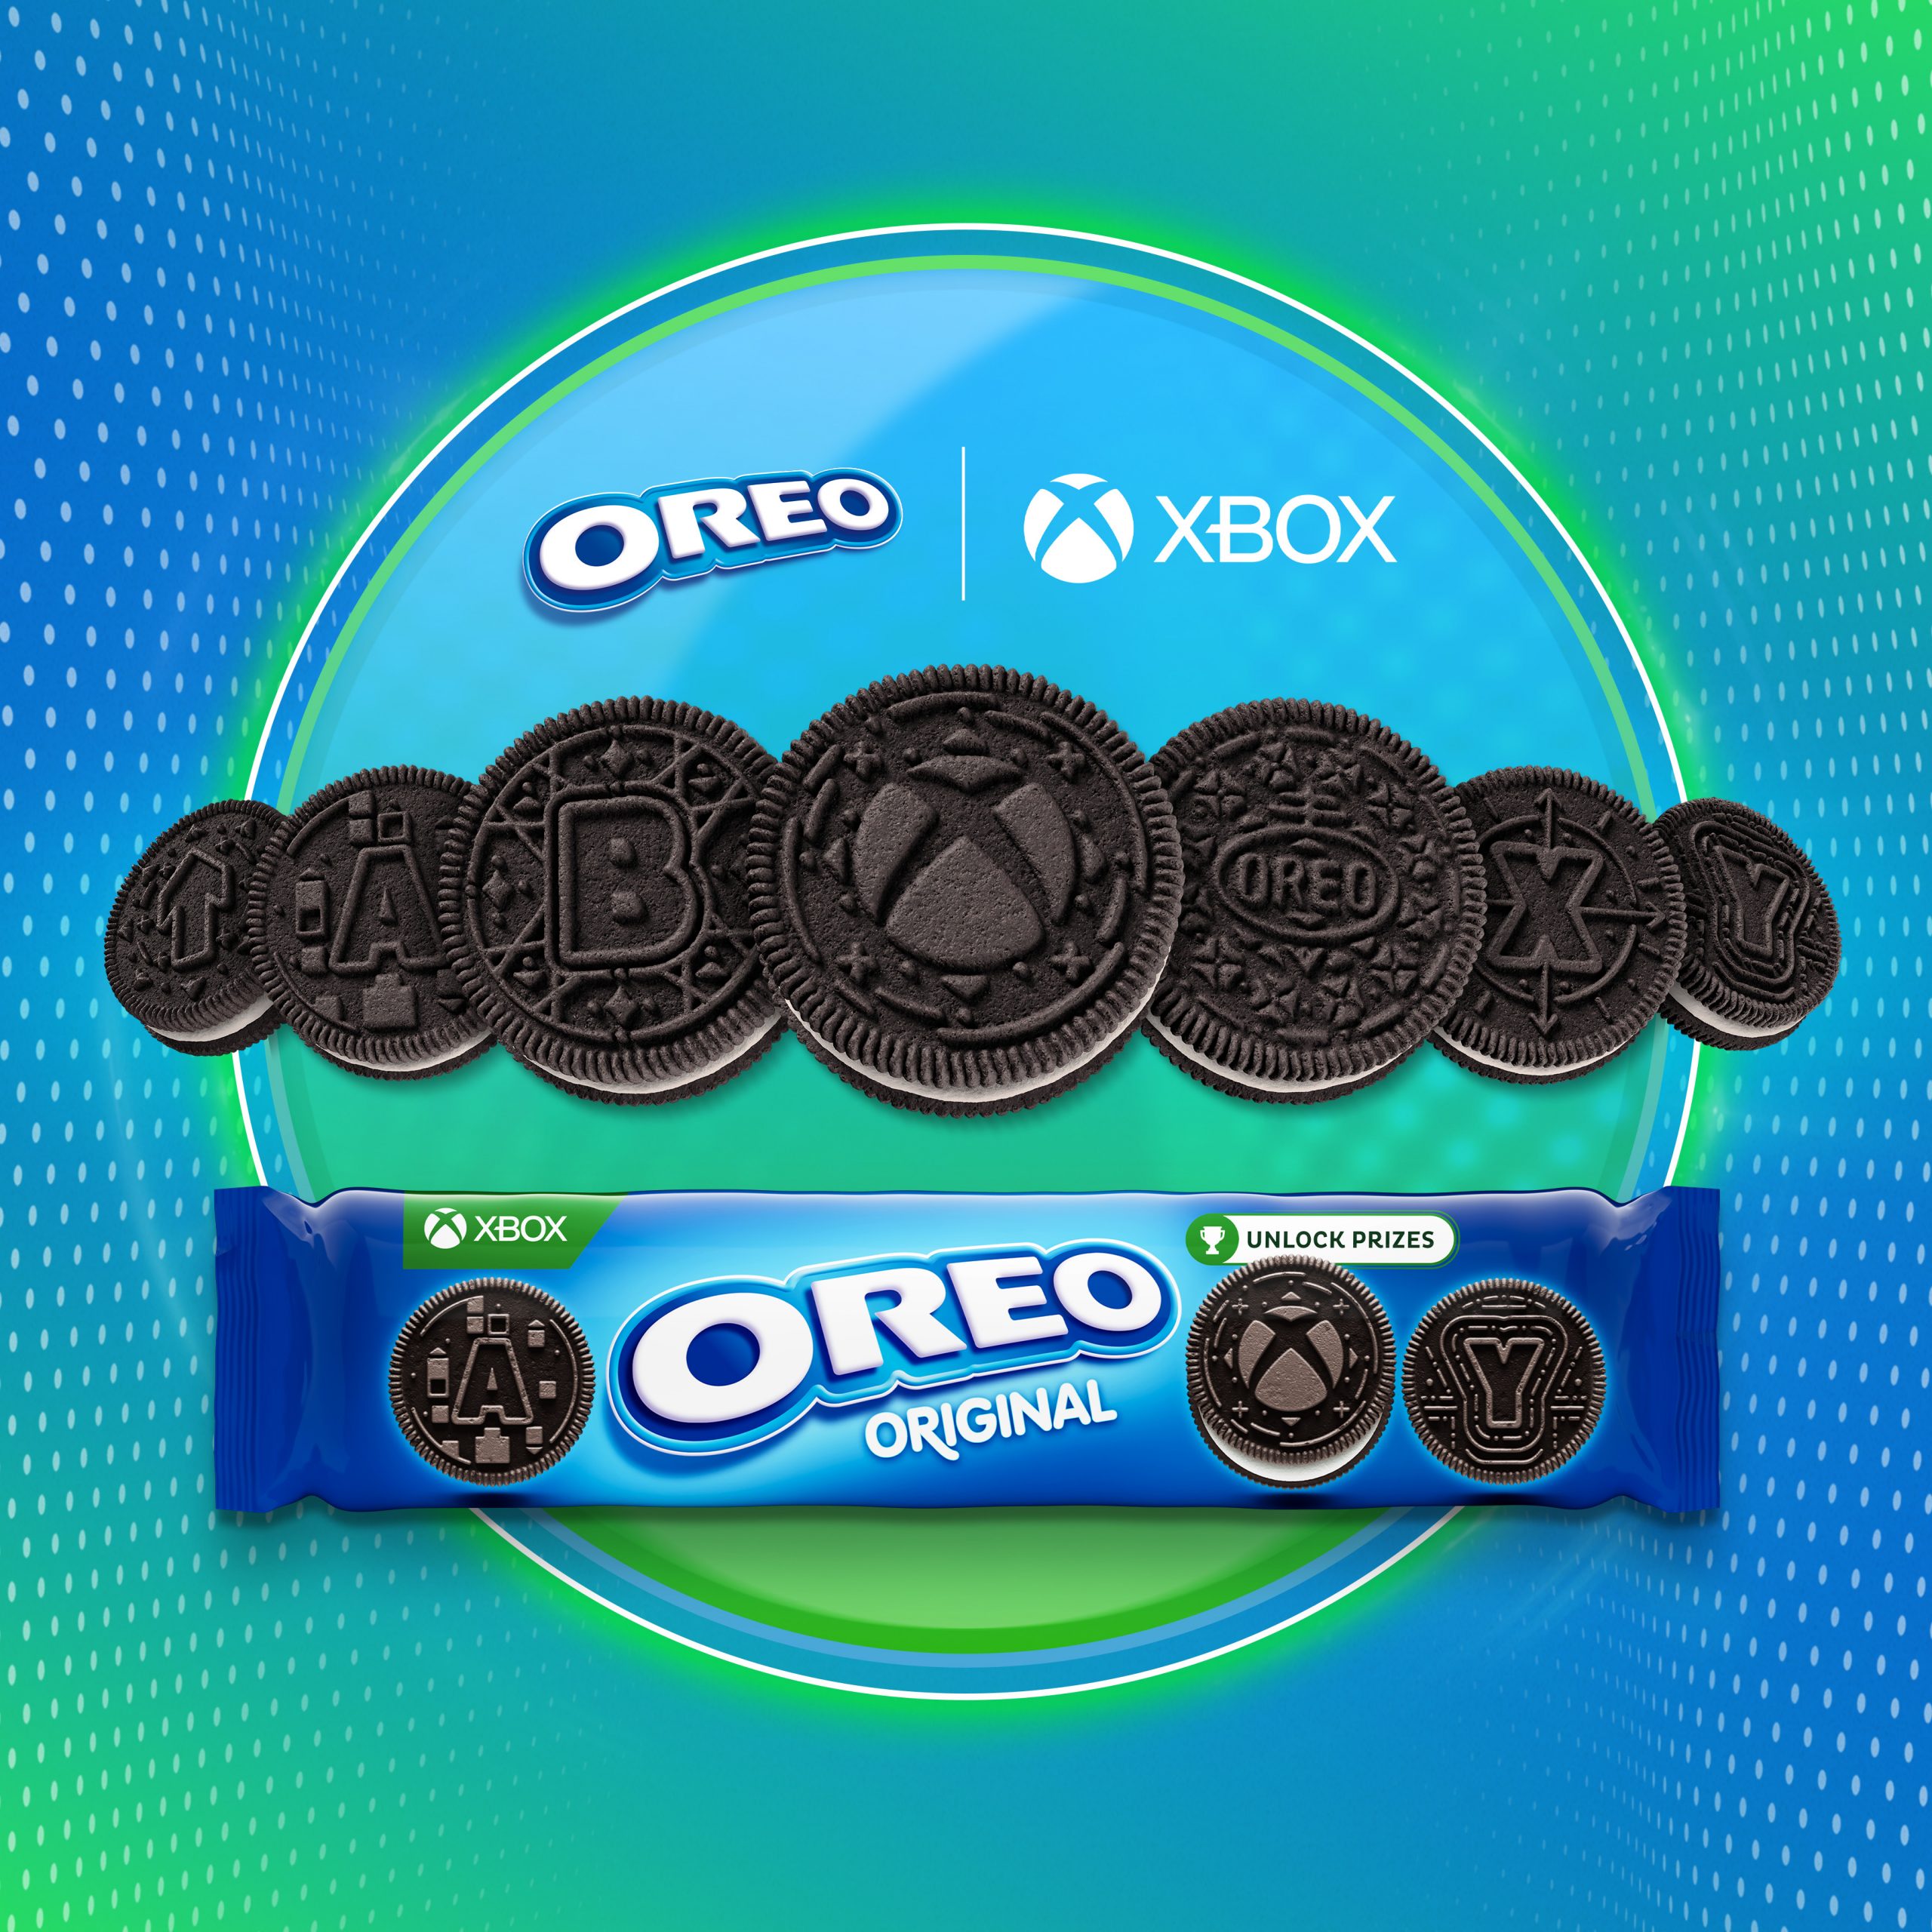 Shoppers can unlock playfulness with OREO and Xbox on-pack promotion